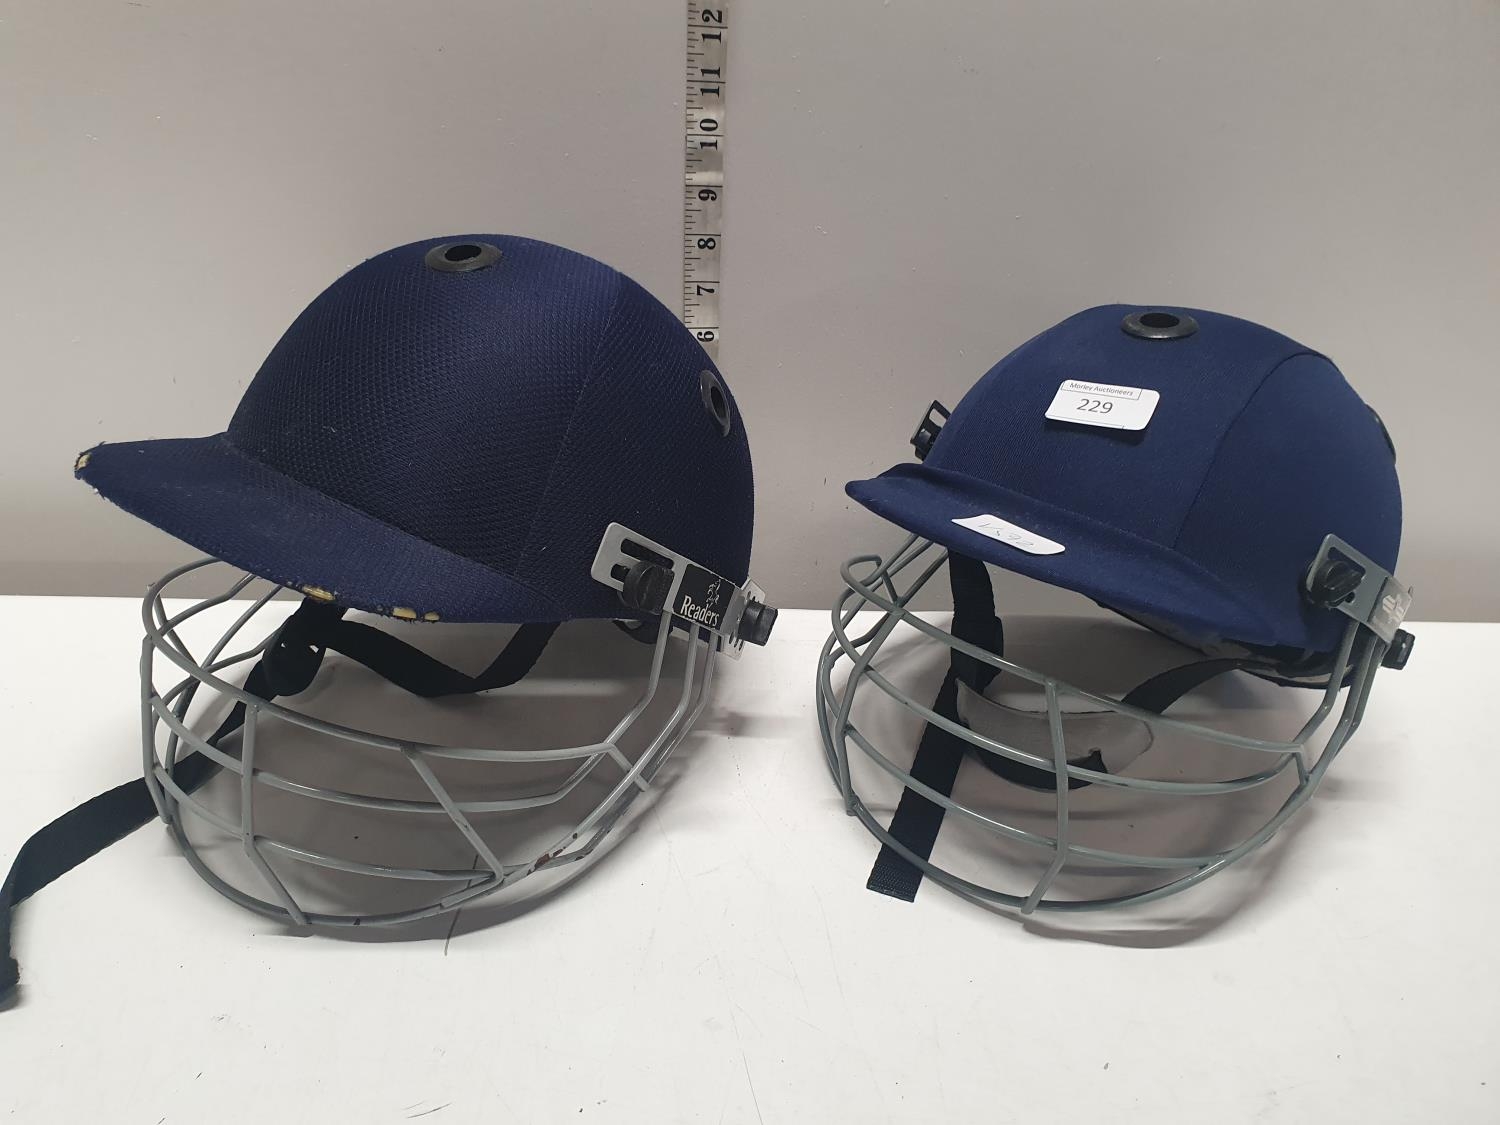 Two cricket helmets, shipping unavailable